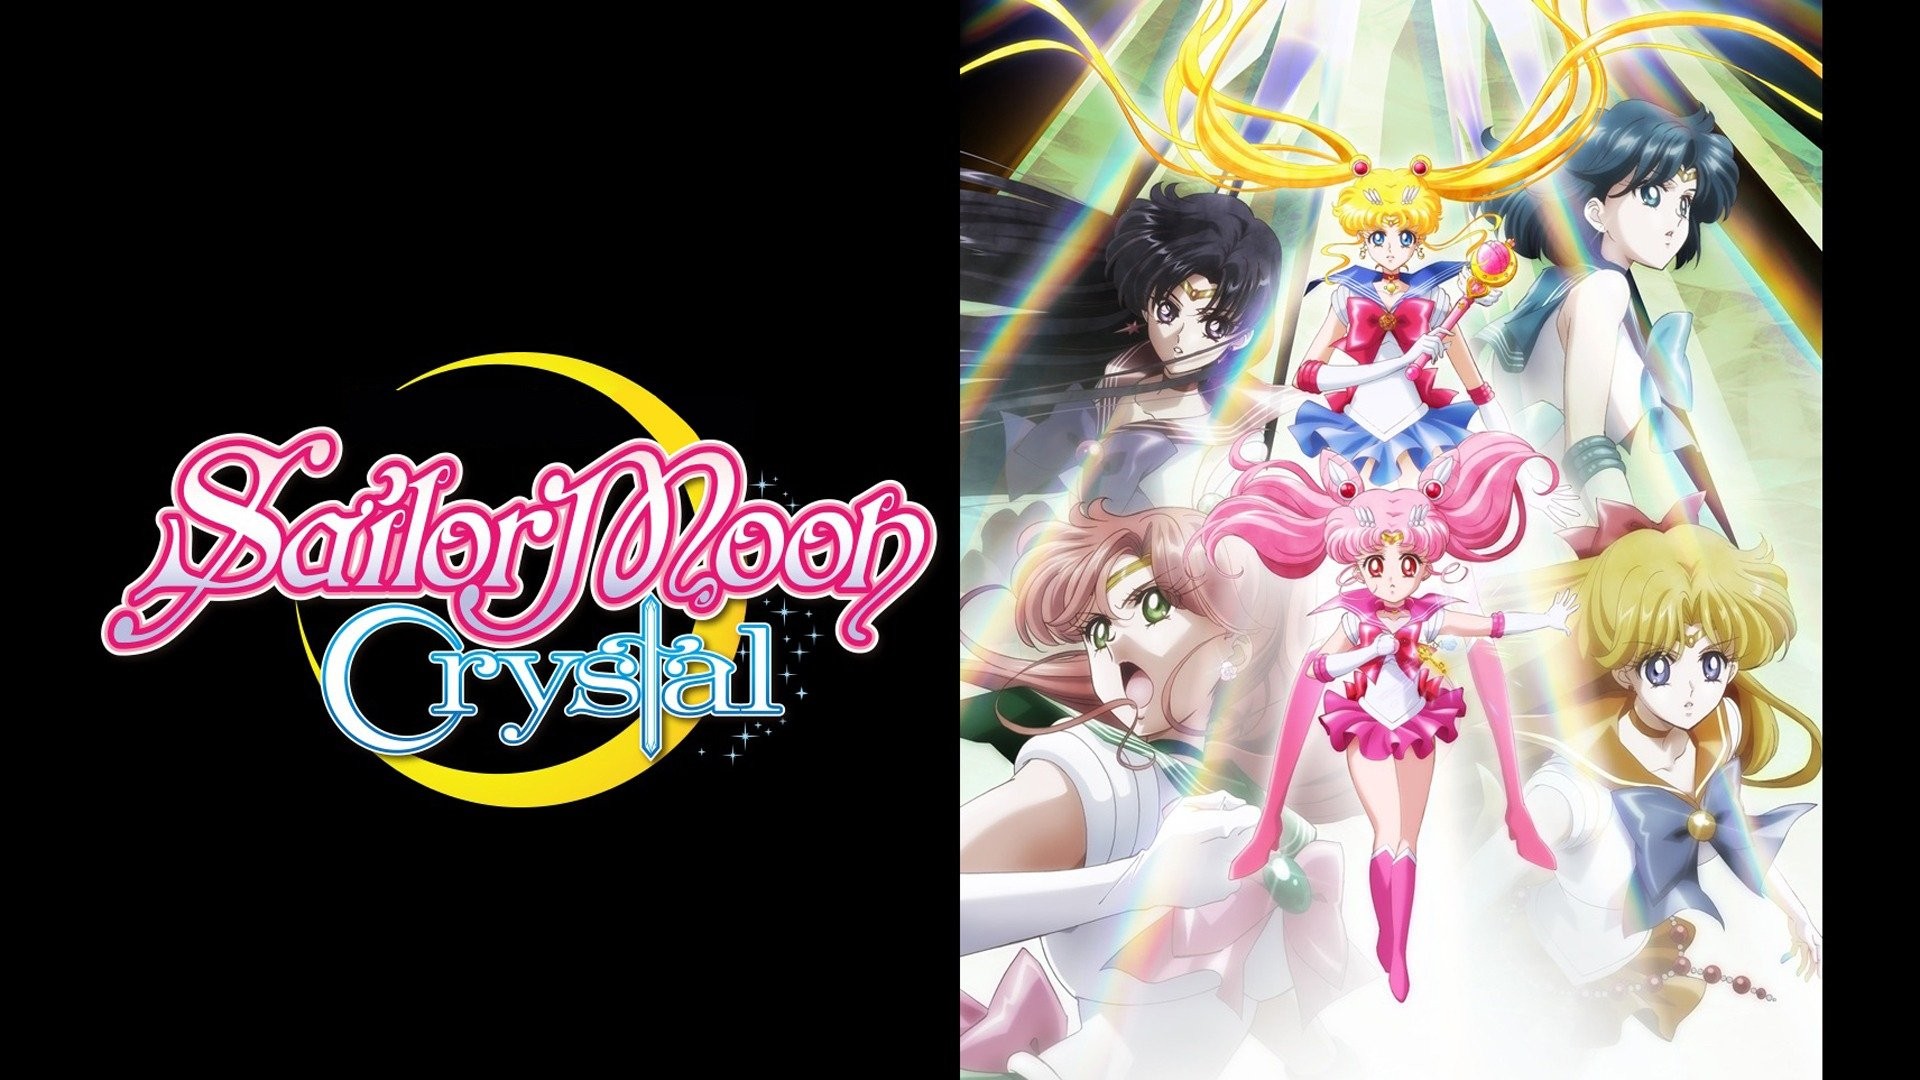 Stream Sailor Moon Crystal {Season 3] (Fall In Love With The New Moon) -  Japanese - FULL AUDIO :D by  懐かしいアニメソングコレクション～2（NostalgicAnimeSongCollection～2)